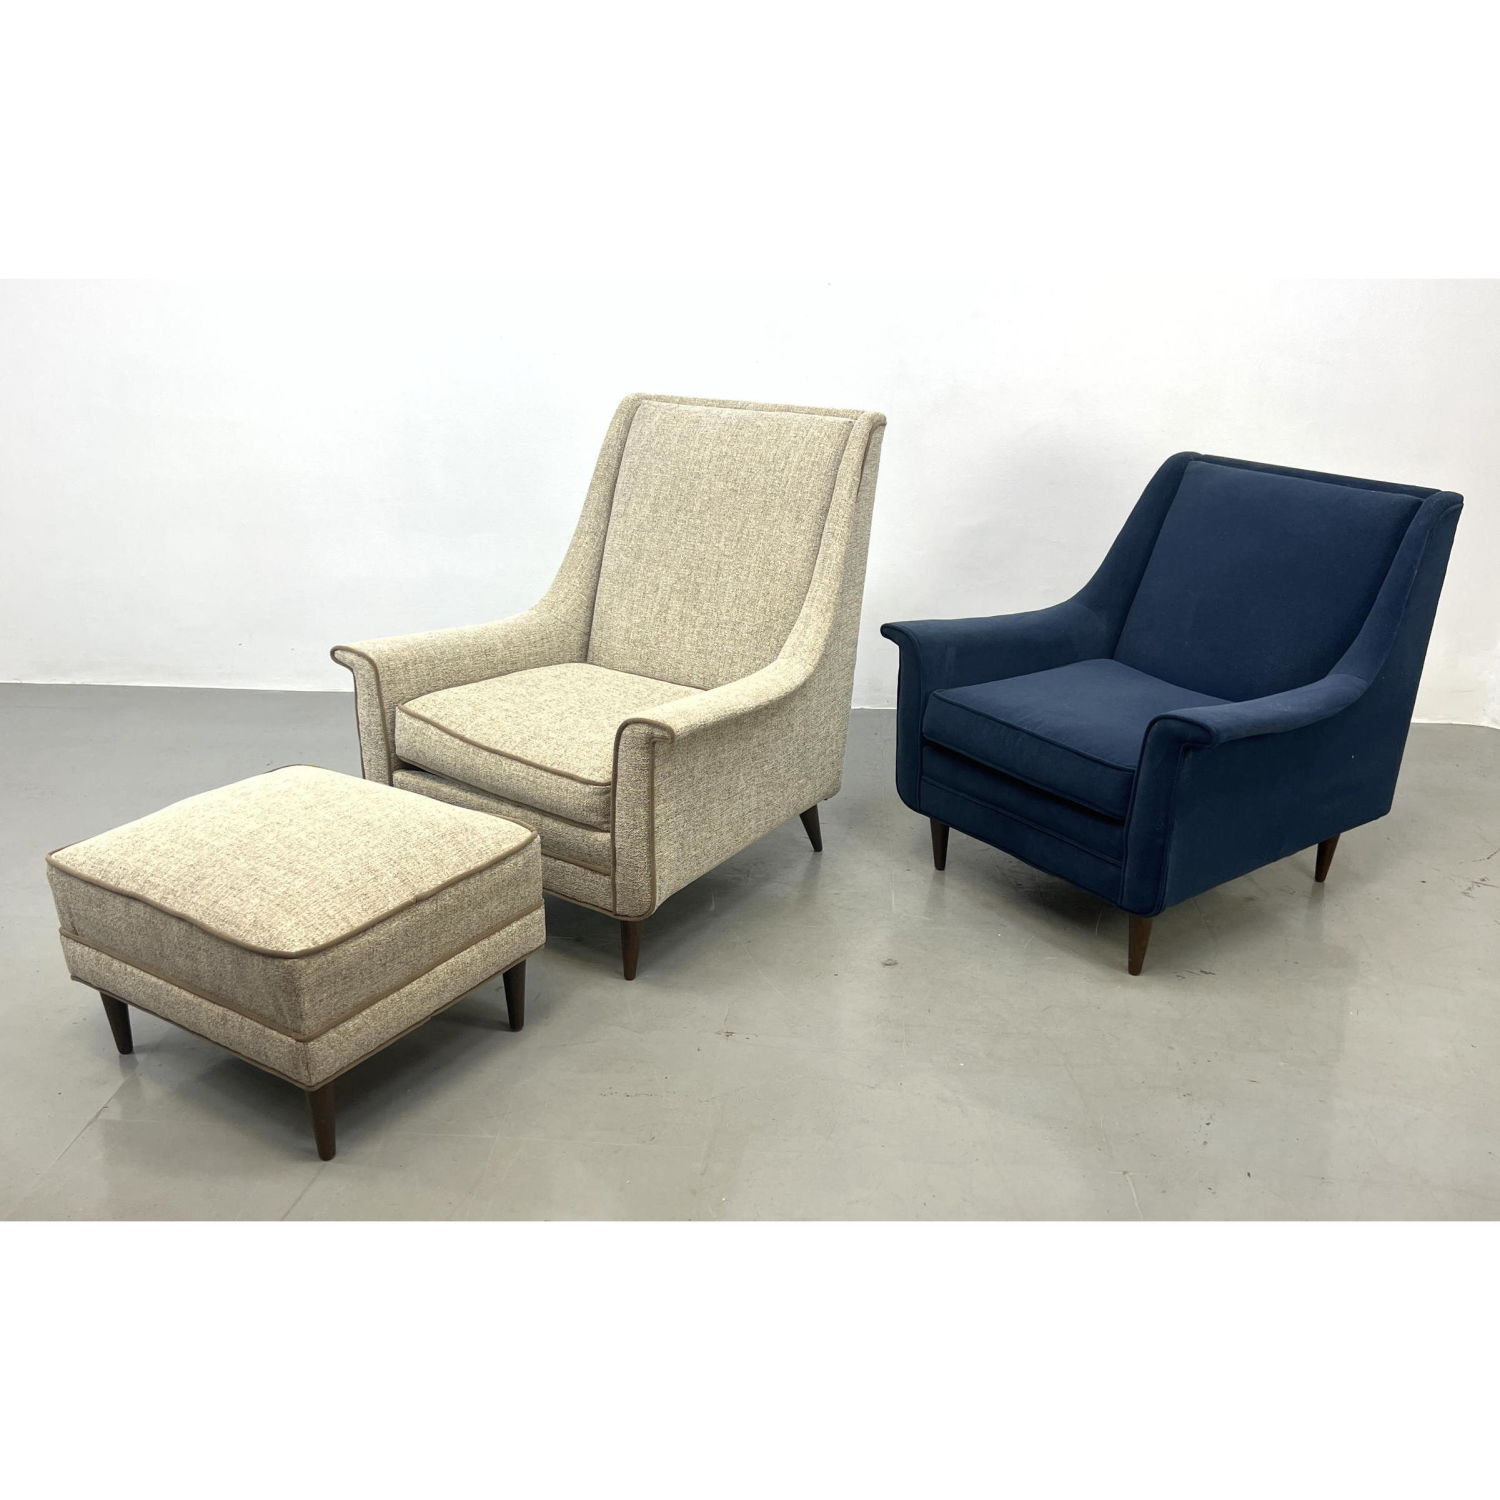 3pc His and Hers Lounge Chairs 2b904c